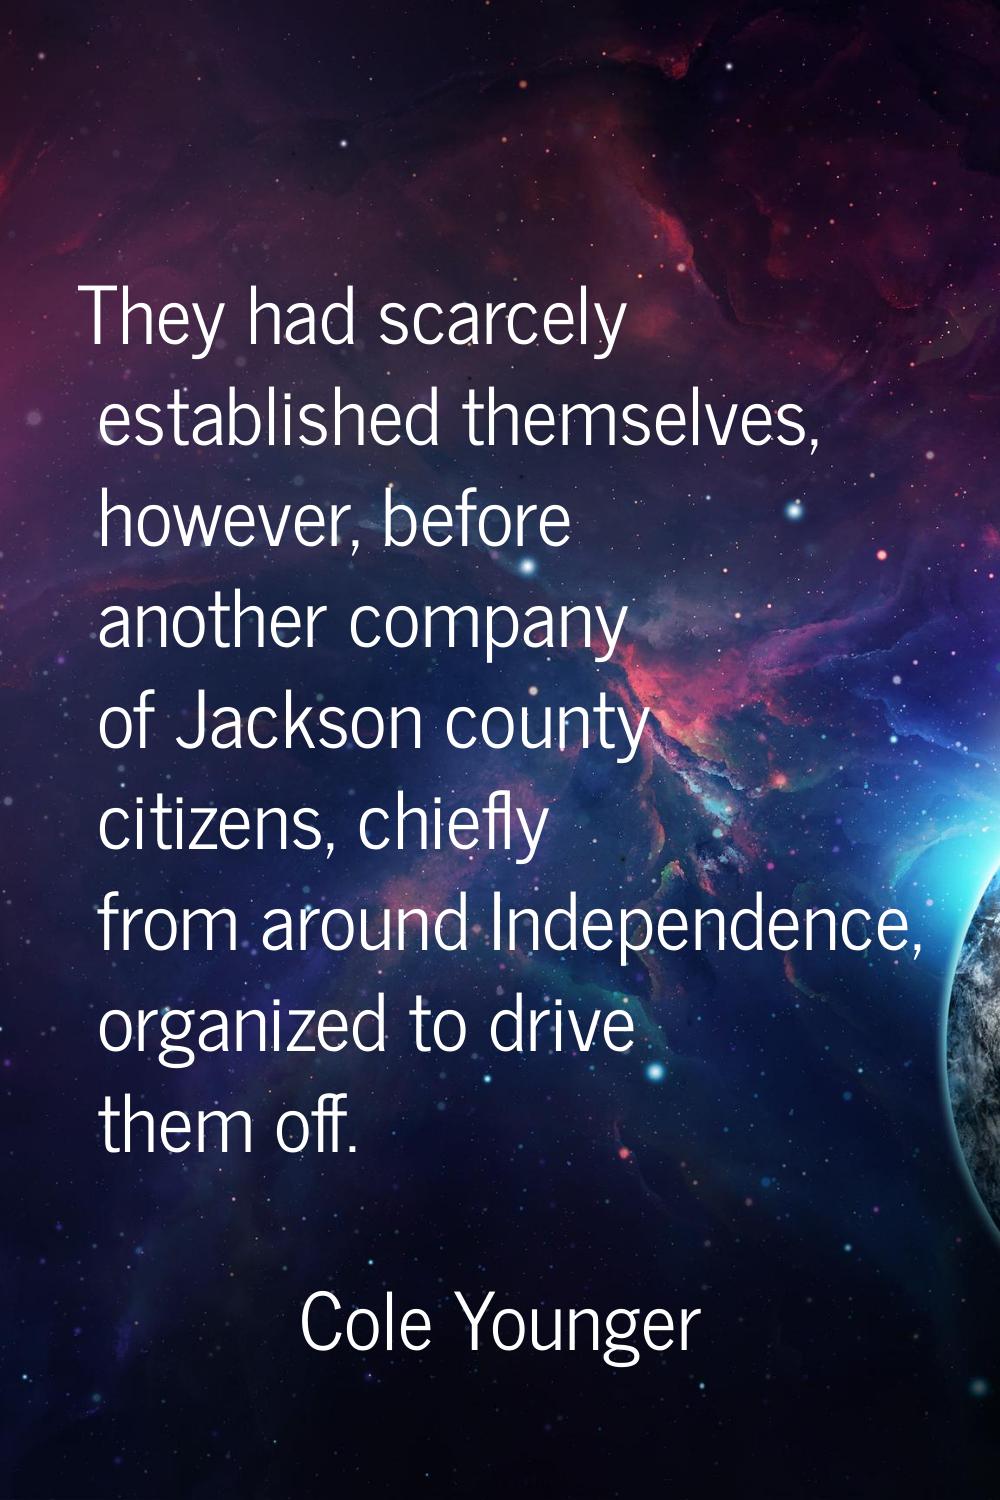 They had scarcely established themselves, however, before another company of Jackson county citizen